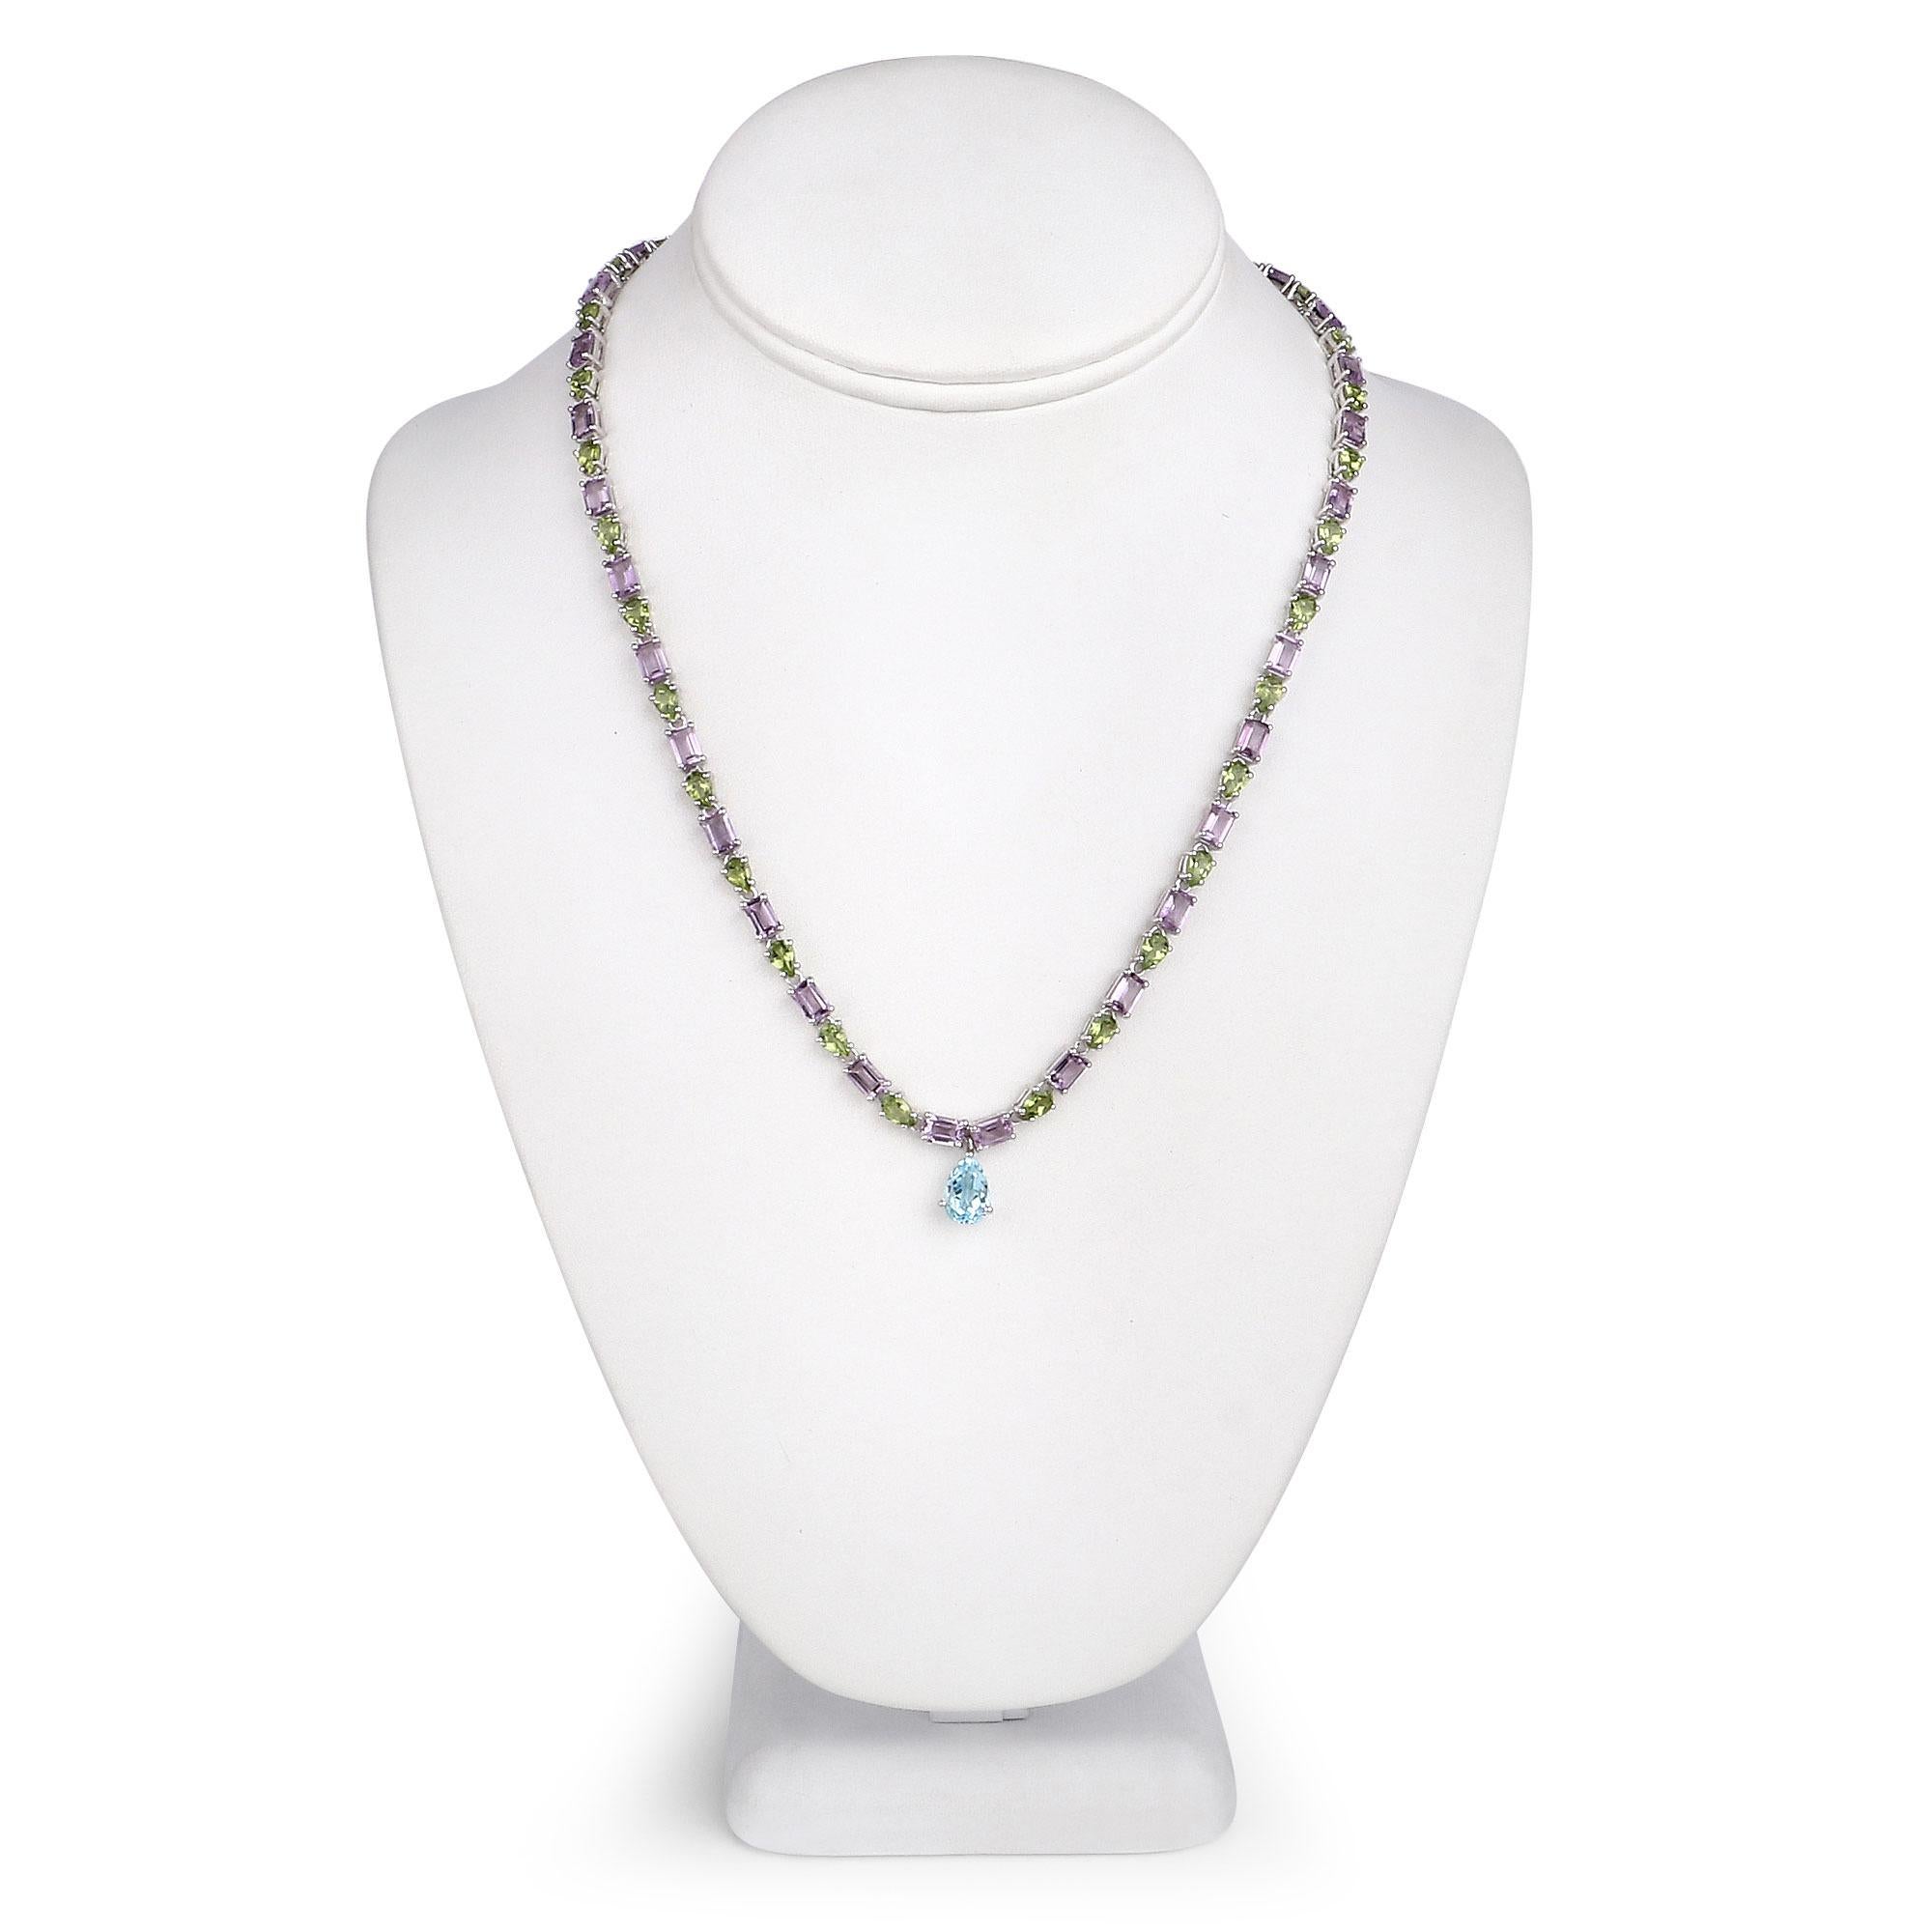 Natural Blue Topaz Amethyst and Peridot Eternity Necklace 32 Carats Silver In Excellent Condition For Sale In Laguna Niguel, CA